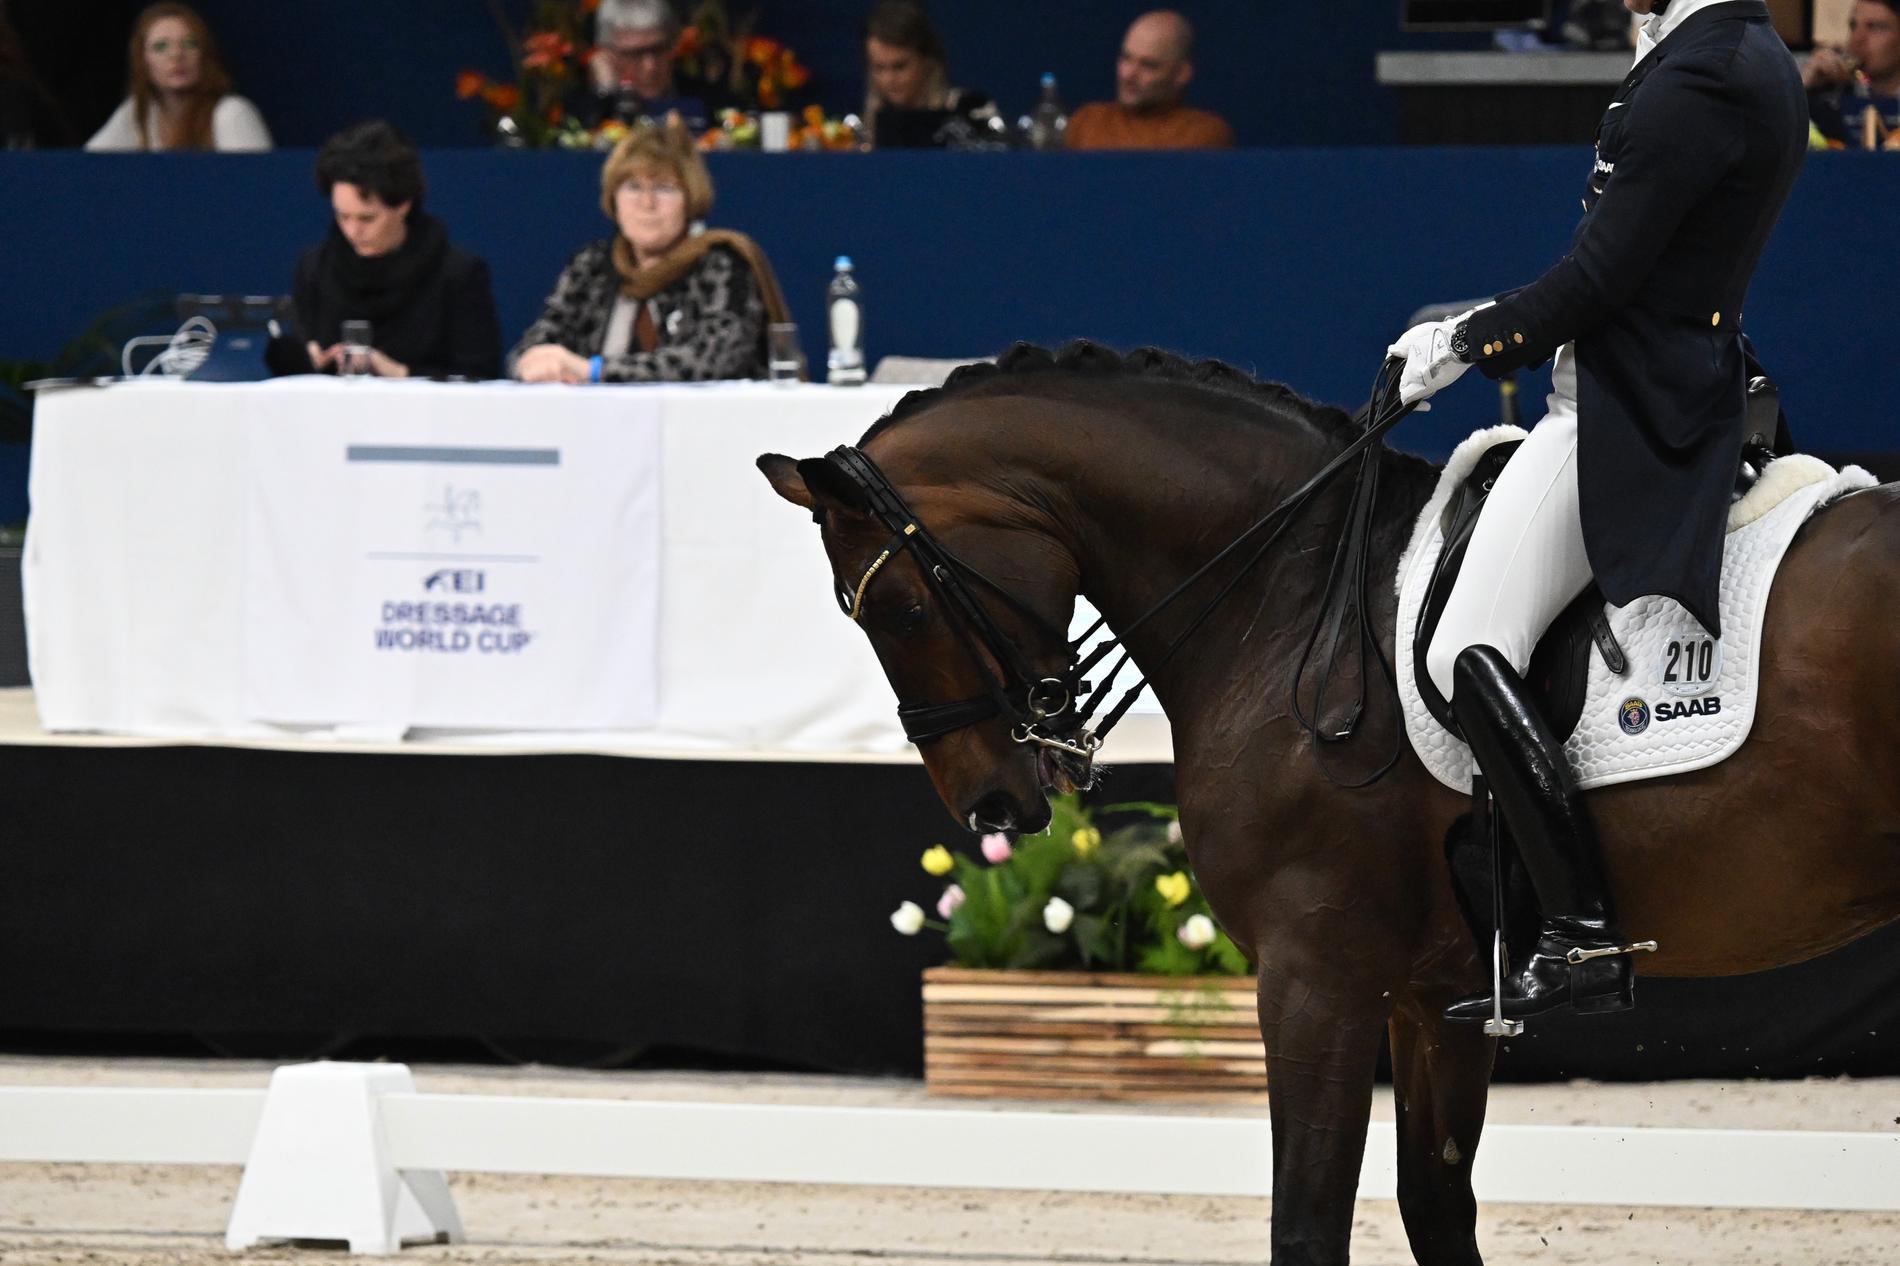  In Amsterdam, Patrik Kittel's horse Touchdown had a blue-colored tongue right in front of the judge.